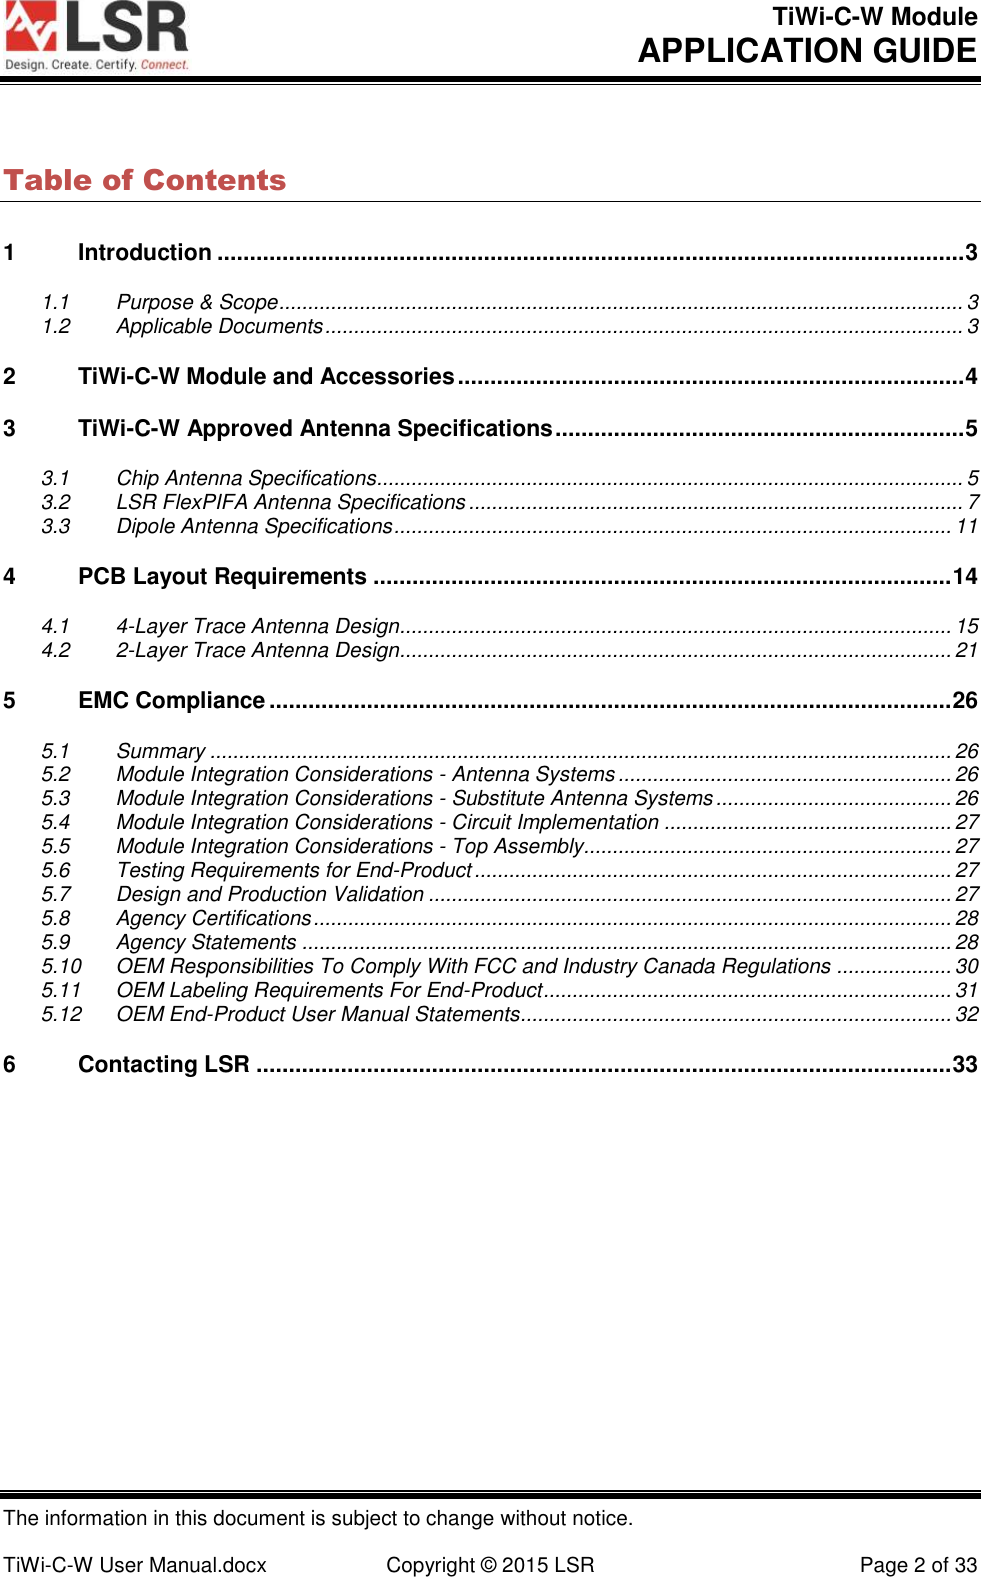 TiWi-C-W Module       APPLICATION GUIDE  The information in this document is subject to change without notice.  TiWi-C-W User Manual.docx  Copyright © 2015 LSR  Page 2 of 33 Table of Contents 1 Introduction ................................................................................................................... 3 1.1 Purpose &amp; Scope ....................................................................................................................... 3 1.2 Applicable Documents ............................................................................................................... 3 2 TiWi-C-W Module and Accessories .............................................................................. 4 3 TiWi-C-W Approved Antenna Specifications ............................................................... 5 3.1 Chip Antenna Specifications...................................................................................................... 5 3.2 LSR FlexPIFA Antenna Specifications ...................................................................................... 7 3.3 Dipole Antenna Specifications ................................................................................................. 11 4 PCB Layout Requirements ......................................................................................... 14 4.1 4-Layer Trace Antenna Design................................................................................................ 15 4.2 2-Layer Trace Antenna Design................................................................................................ 21 5 EMC Compliance ......................................................................................................... 26 5.1 Summary ................................................................................................................................. 26 5.2 Module Integration Considerations - Antenna Systems .......................................................... 26 5.3 Module Integration Considerations - Substitute Antenna Systems ......................................... 26 5.4 Module Integration Considerations - Circuit Implementation .................................................. 27 5.5 Module Integration Considerations - Top Assembly................................................................ 27 5.6 Testing Requirements for End-Product ................................................................................... 27 5.7 Design and Production Validation ........................................................................................... 27 5.8 Agency Certifications ............................................................................................................... 28 5.9 Agency Statements ................................................................................................................. 28 5.10 OEM Responsibilities To Comply With FCC and Industry Canada Regulations .................... 30 5.11 OEM Labeling Requirements For End-Product ....................................................................... 31 5.12 OEM End-Product User Manual Statements ........................................................................... 32 6 Contacting LSR ........................................................................................................... 33 